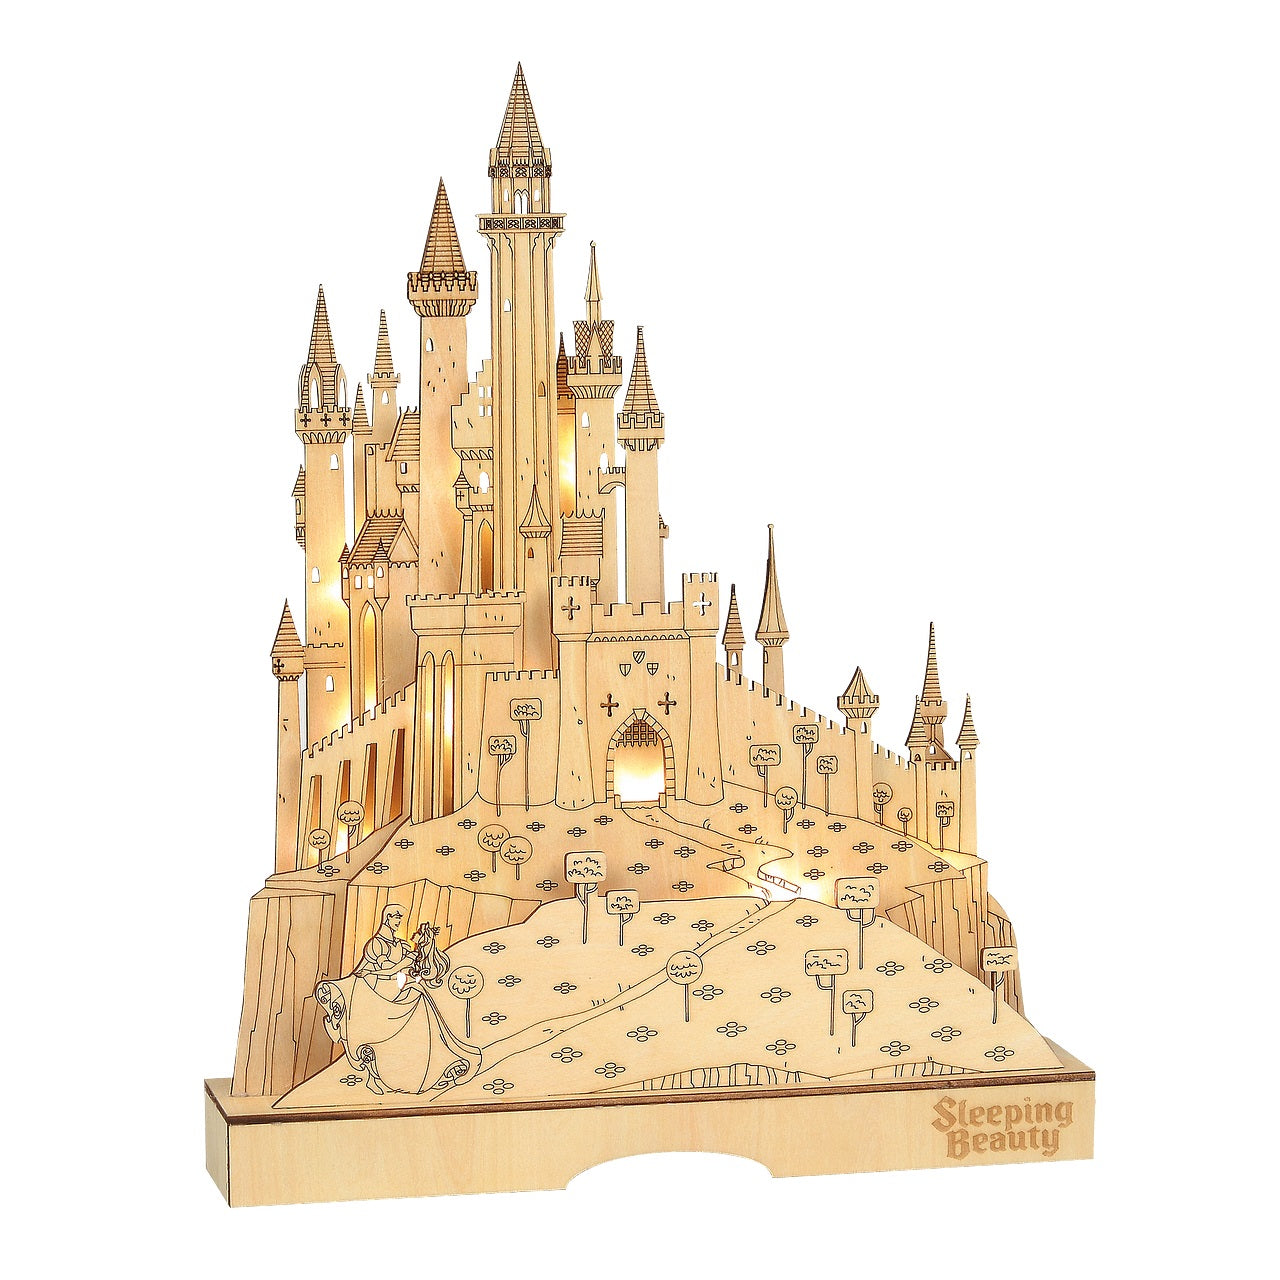 Princess Aurora and Prince Philip can be seen dancing in the woods below the magically light King Stefan's Castle. The natural elements of the Basswood are carefully crafted and layered to build a multidimensional scene. This Sleeping Beauty Castle scene with warm white led lights is the perfect centrepiece for any home decor.